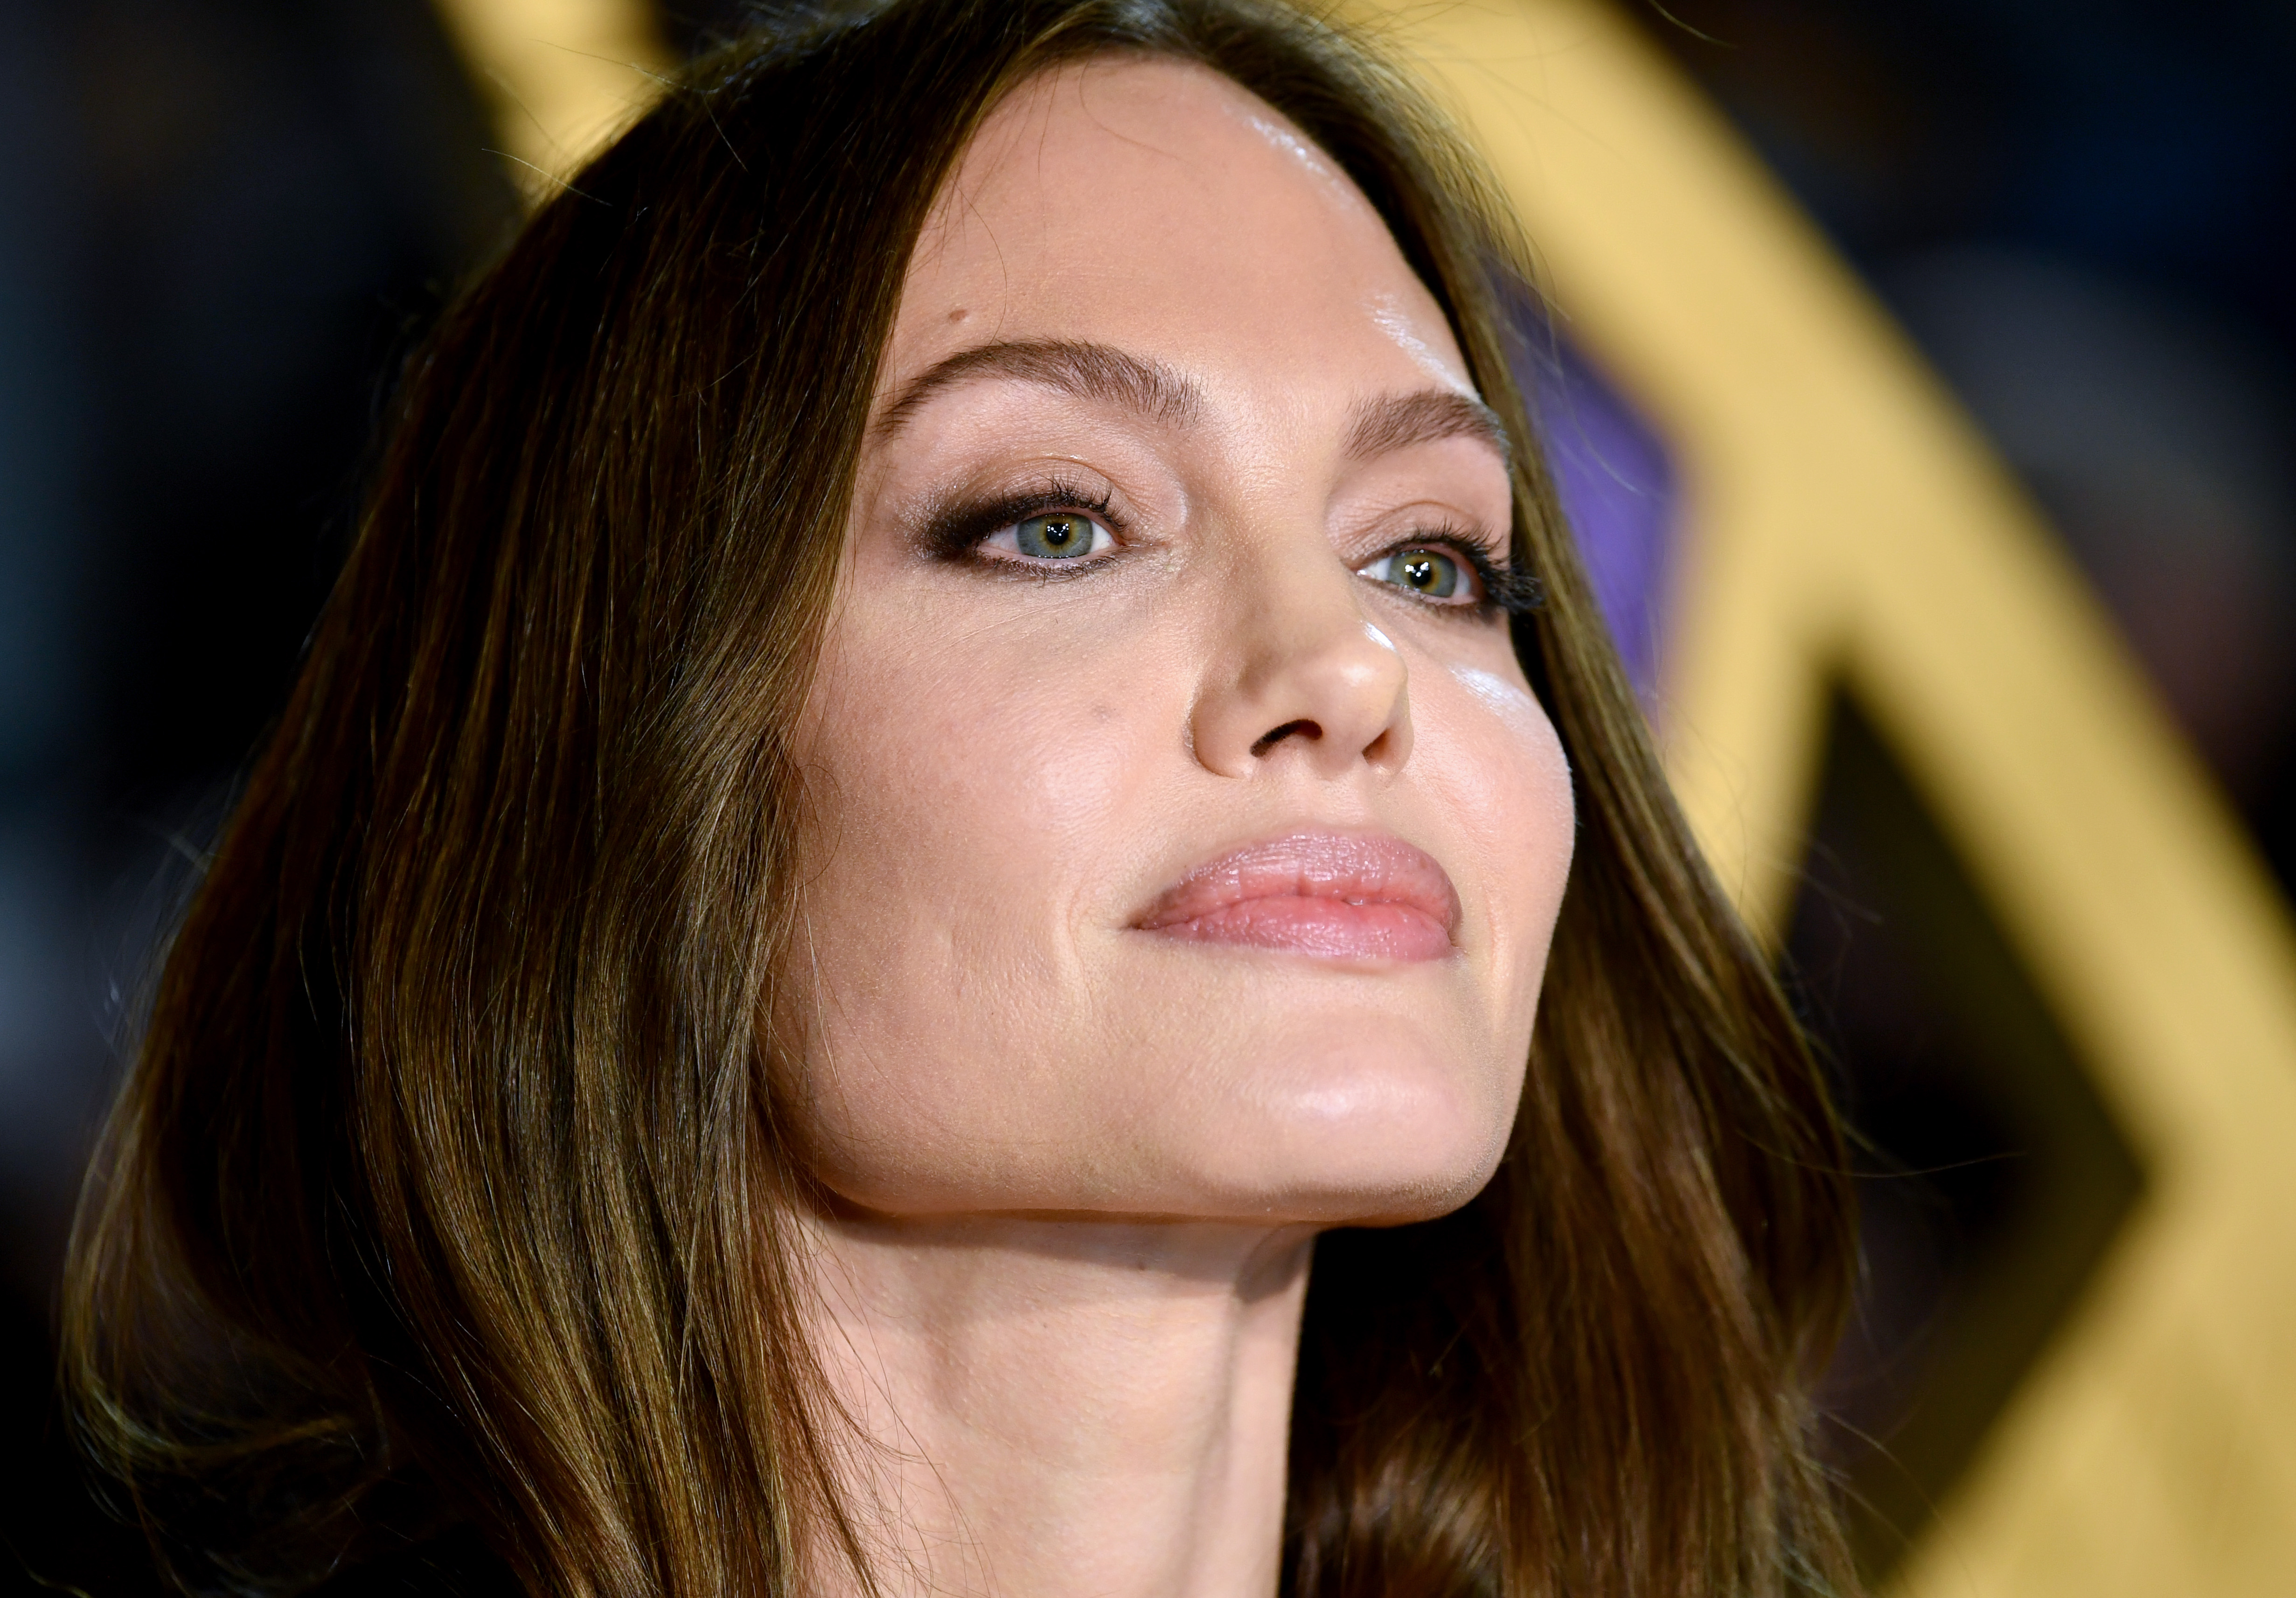 Angelina Jolie attending the UK Gala screening of Marvel Studios' "Eternals" at BFI IMAX Waterloo in London, England on October 27, 2021. | Source: Getty Images